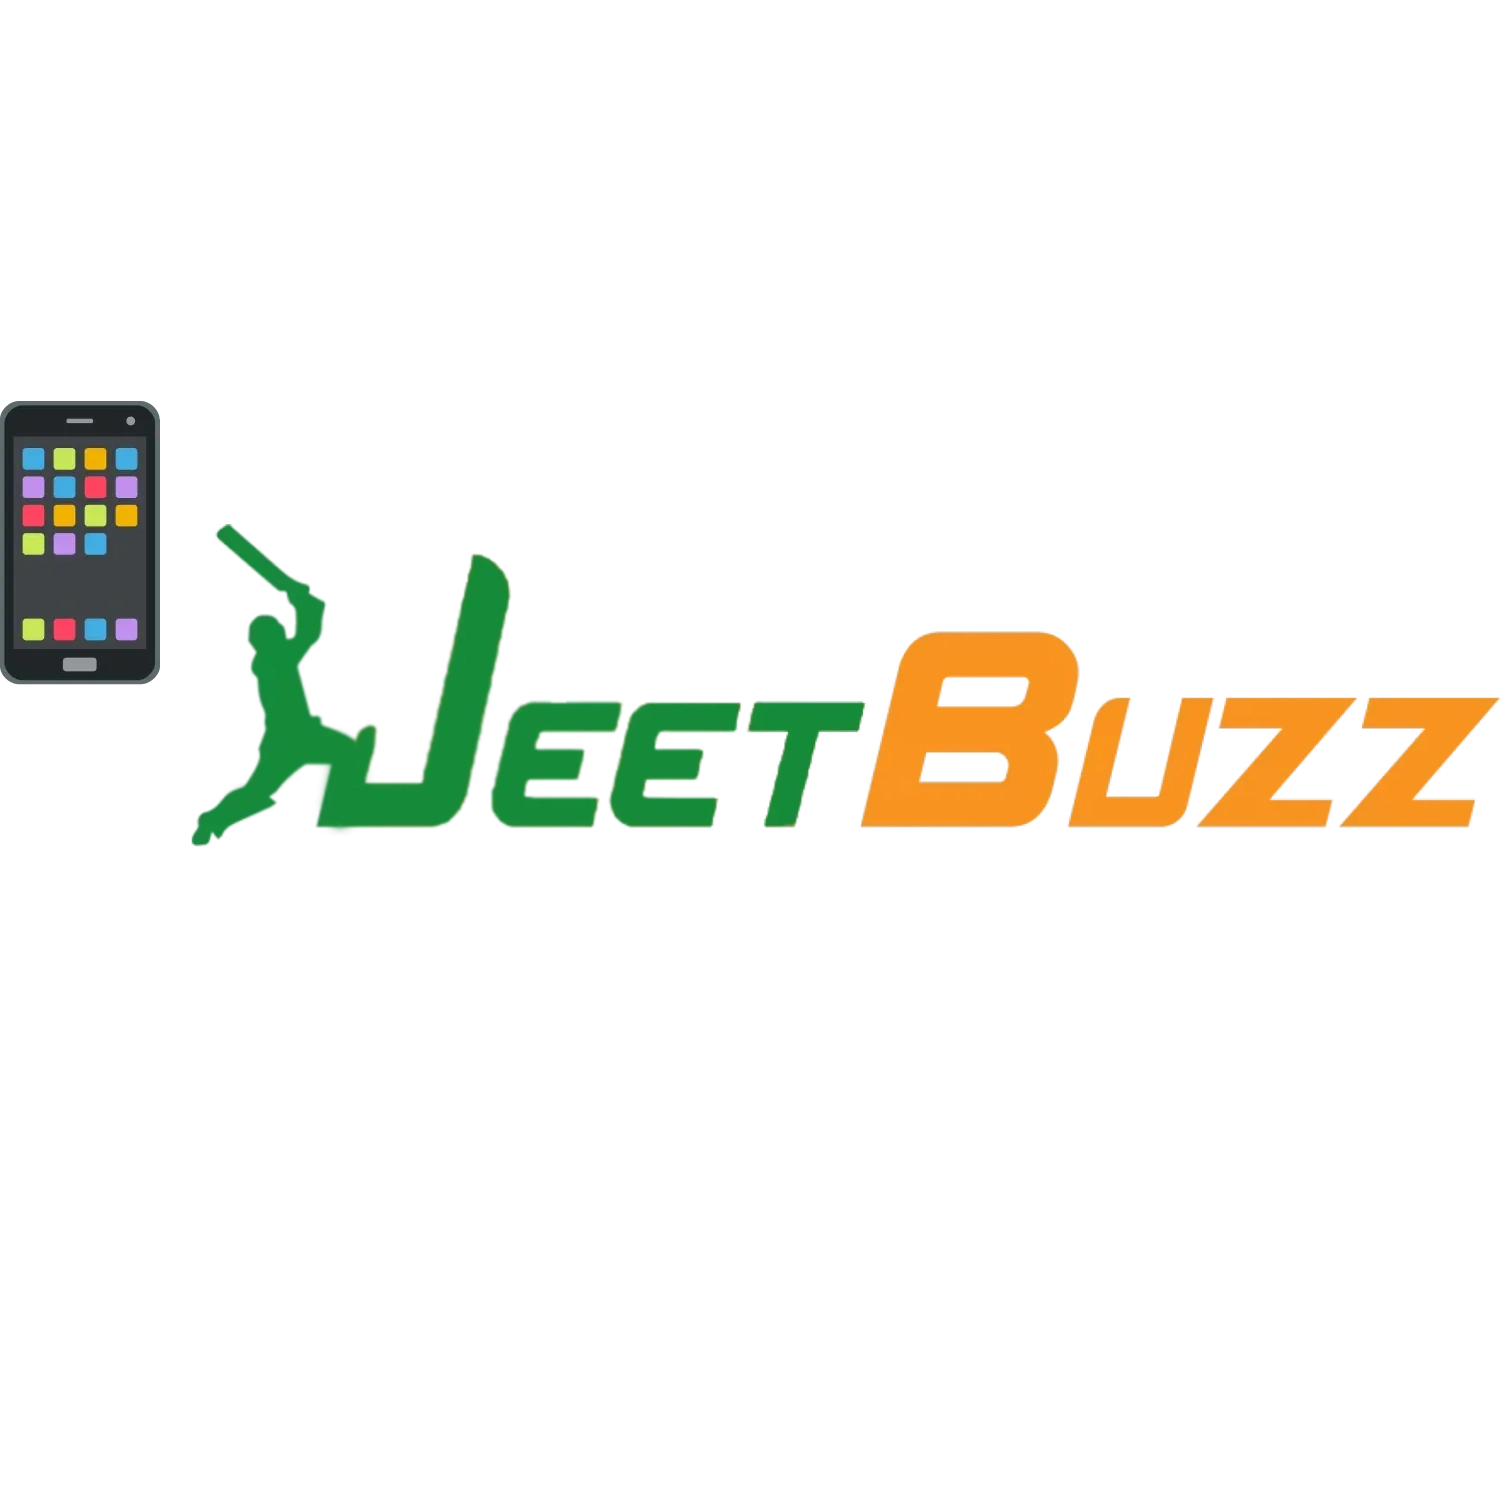 Fast payouts and more can be found on the JeetBuzz app.